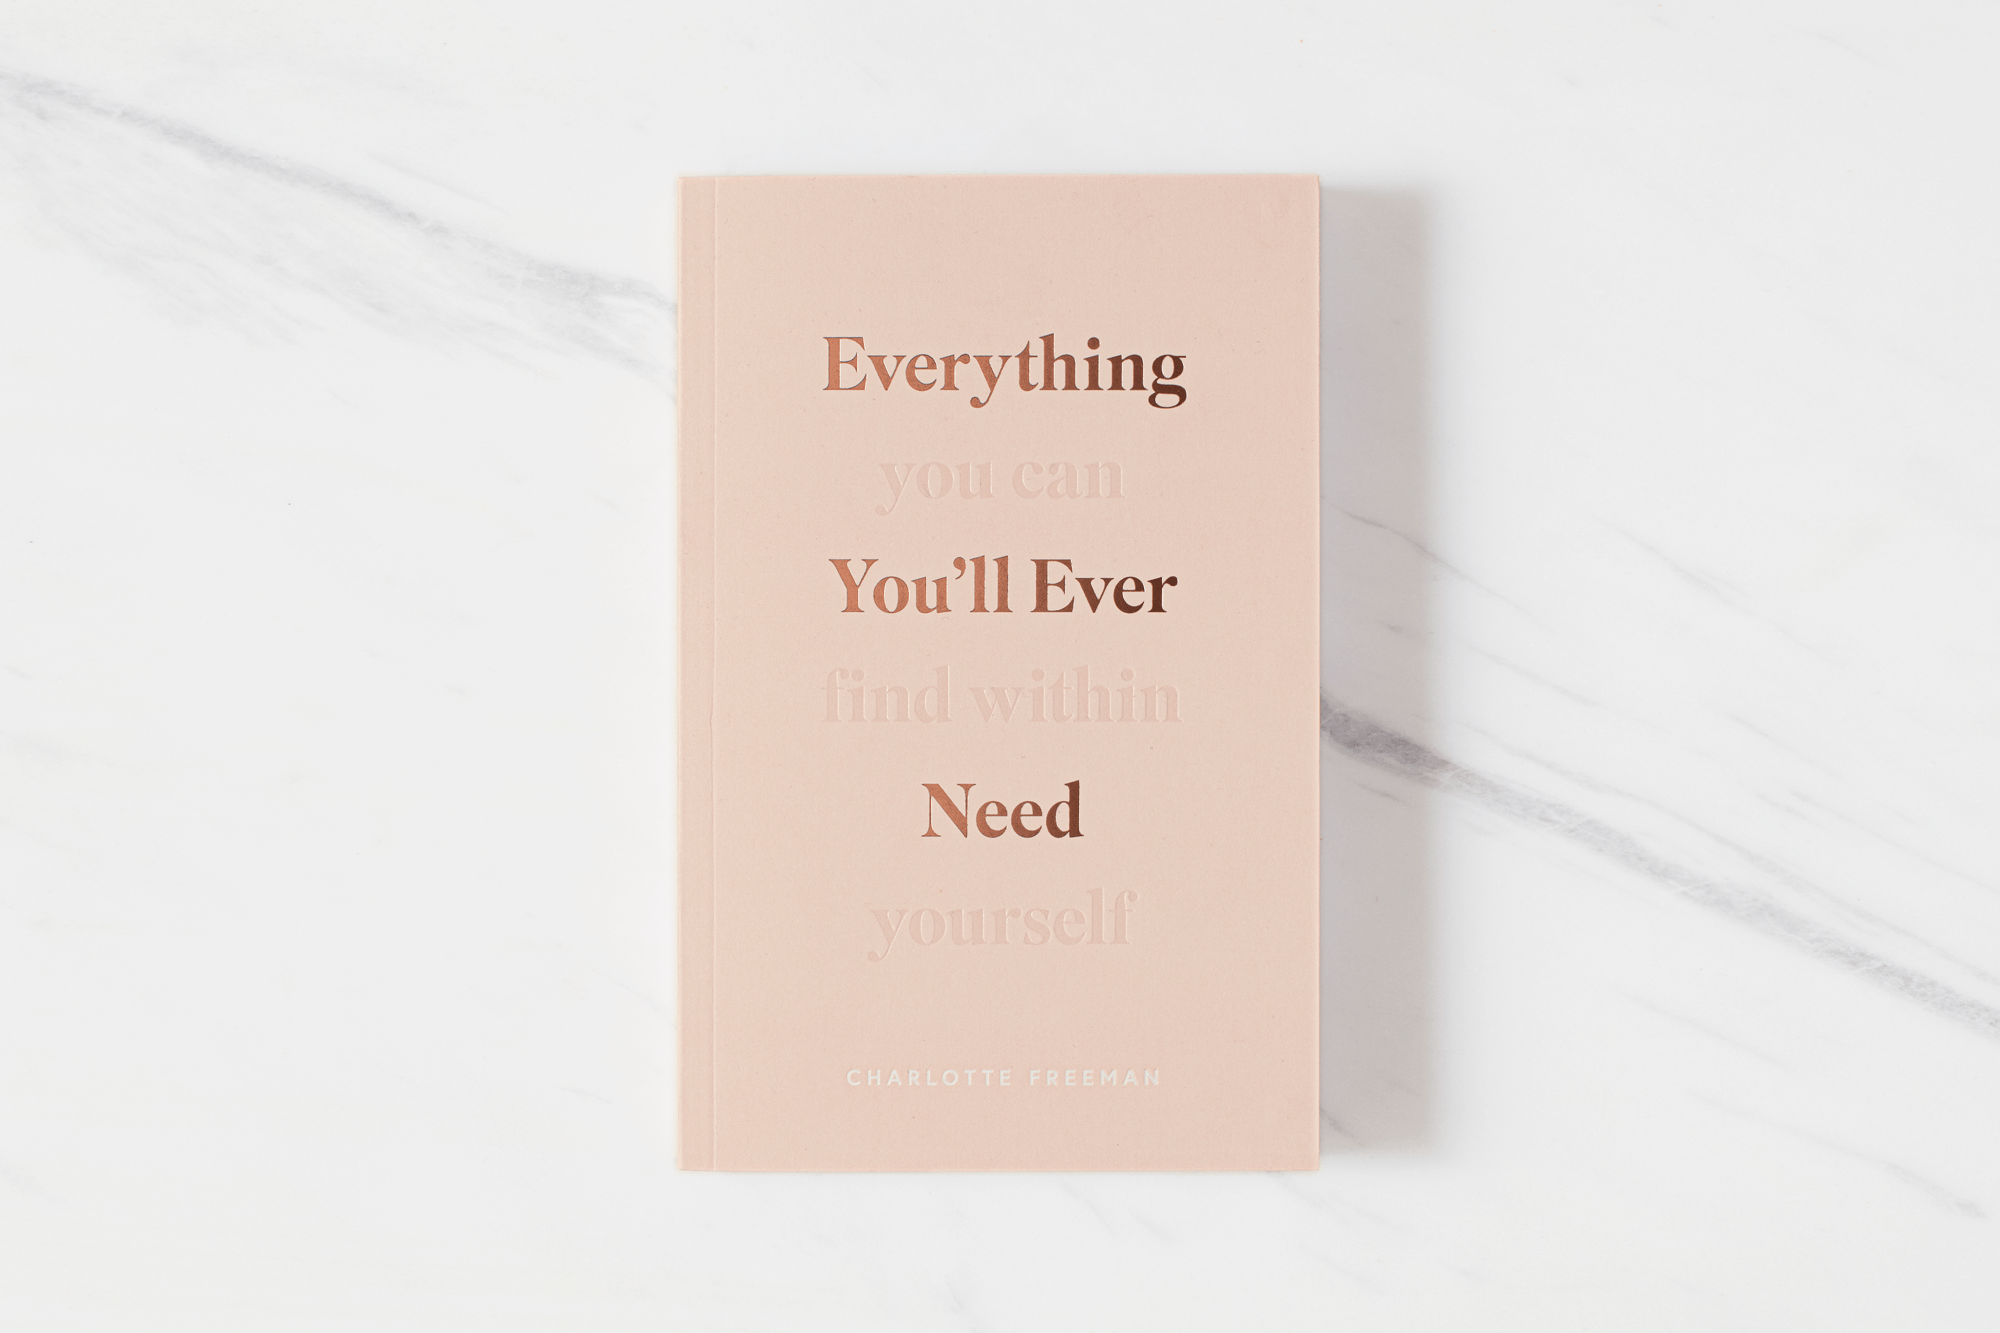 Everything You’ll Ever Need (You Can Find Within Yourself)